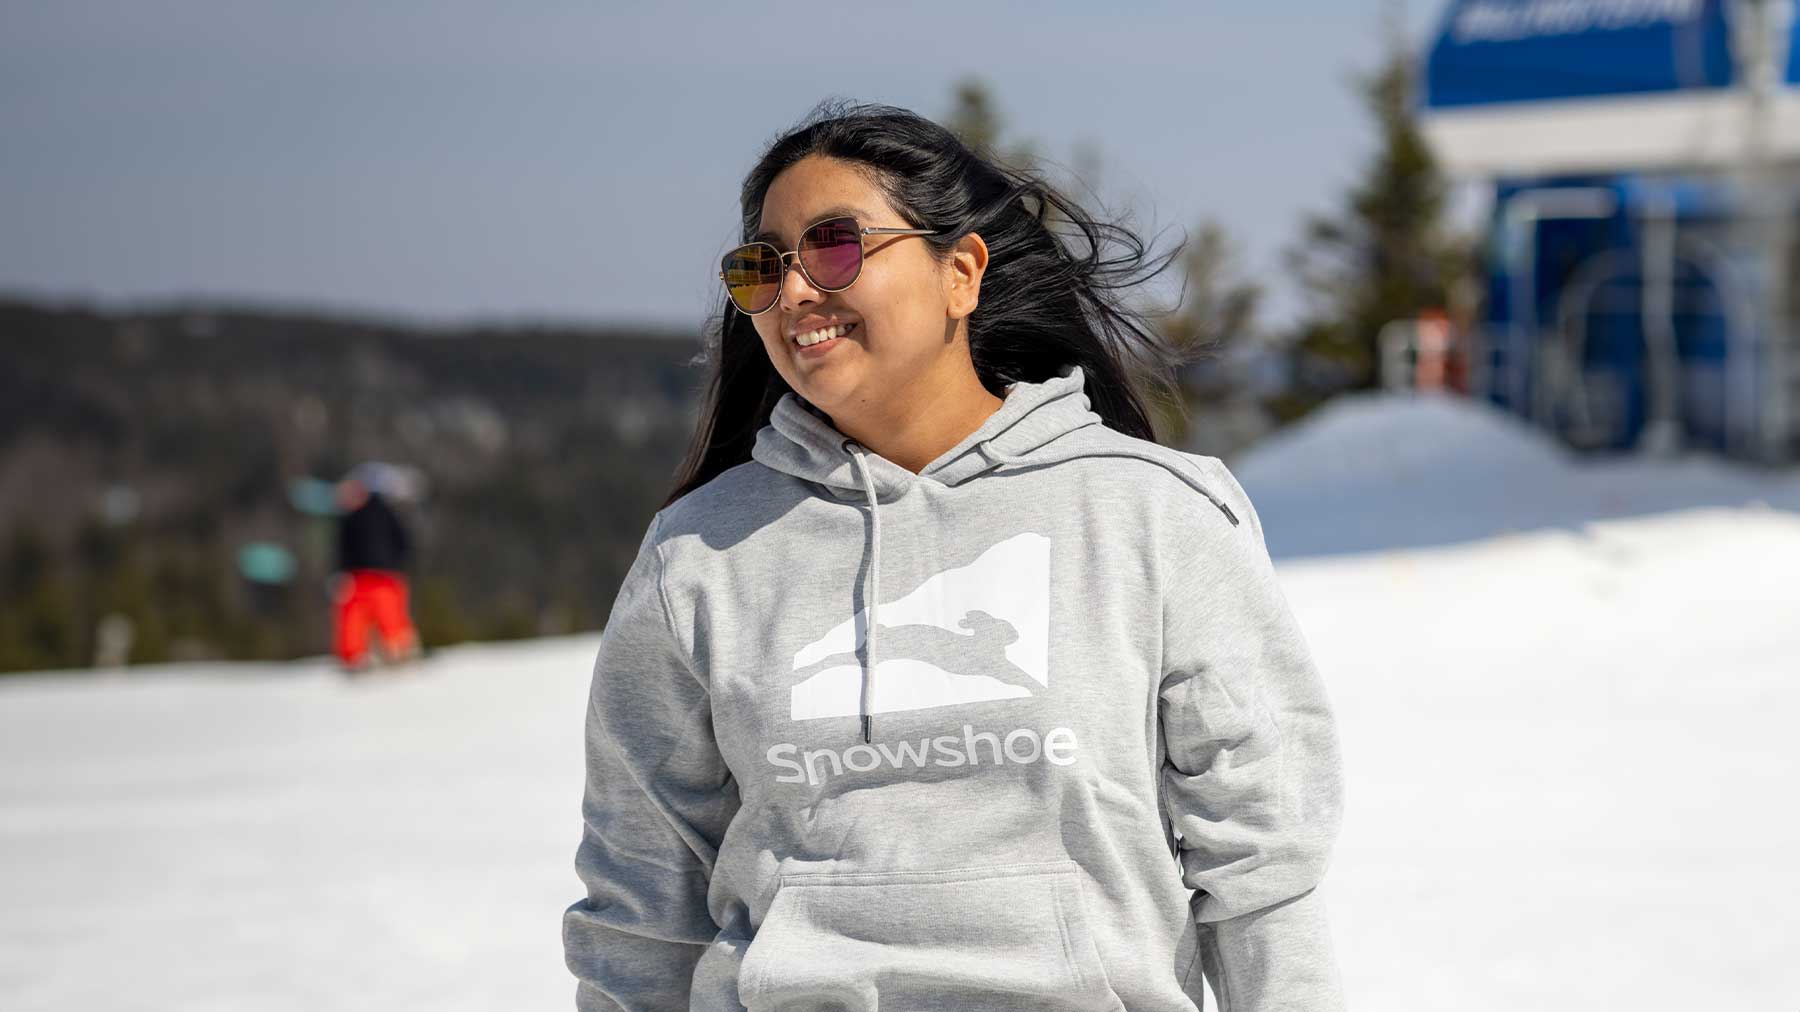 Snowshoe Mountain Clothing & Gift Store